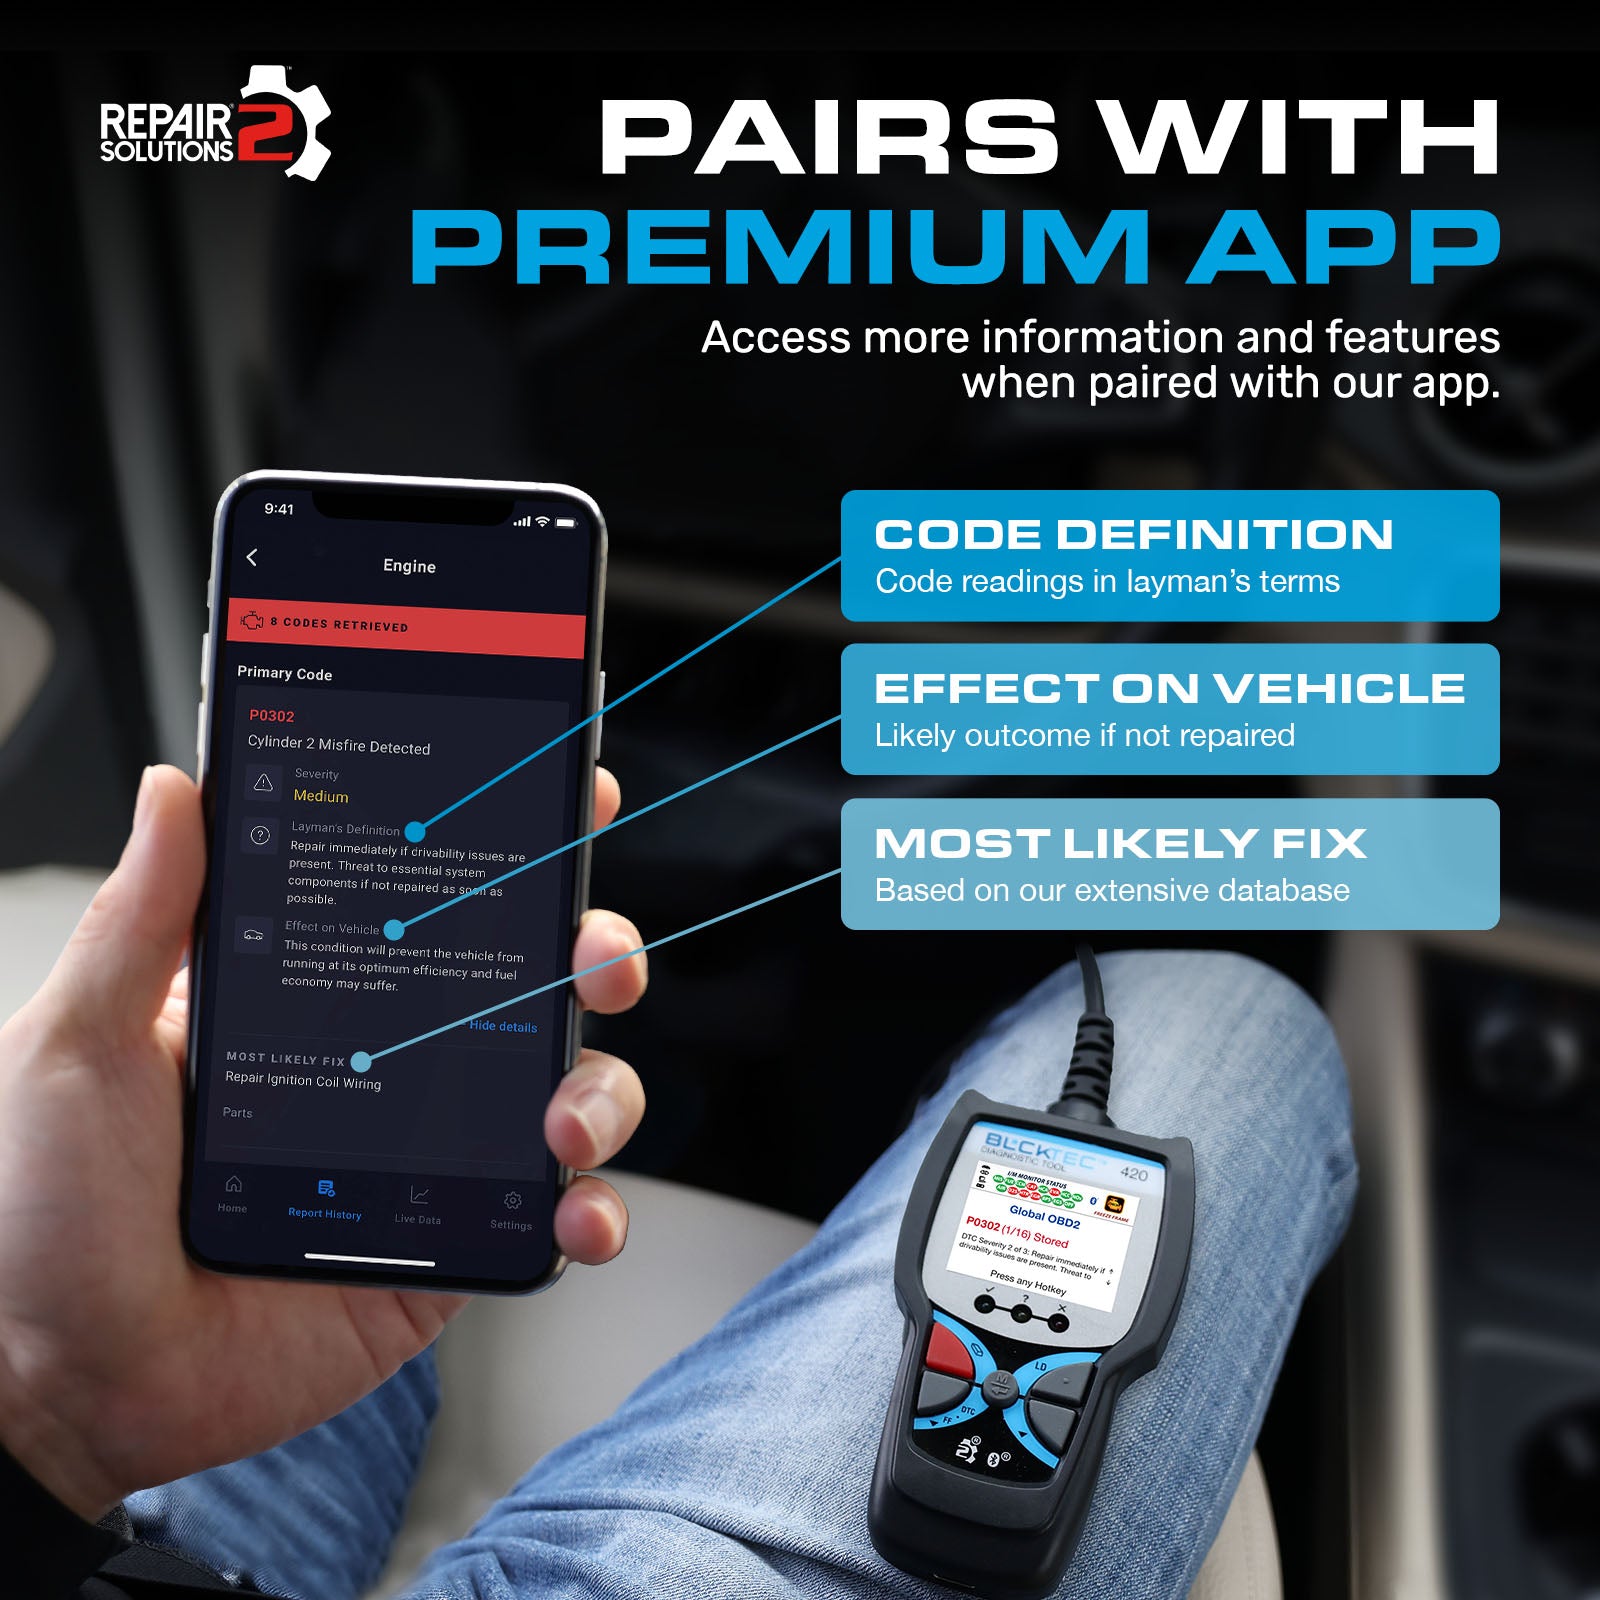 All BLCKTEC OBD2 scanners work with RepairSolution 2, a FREE premium app